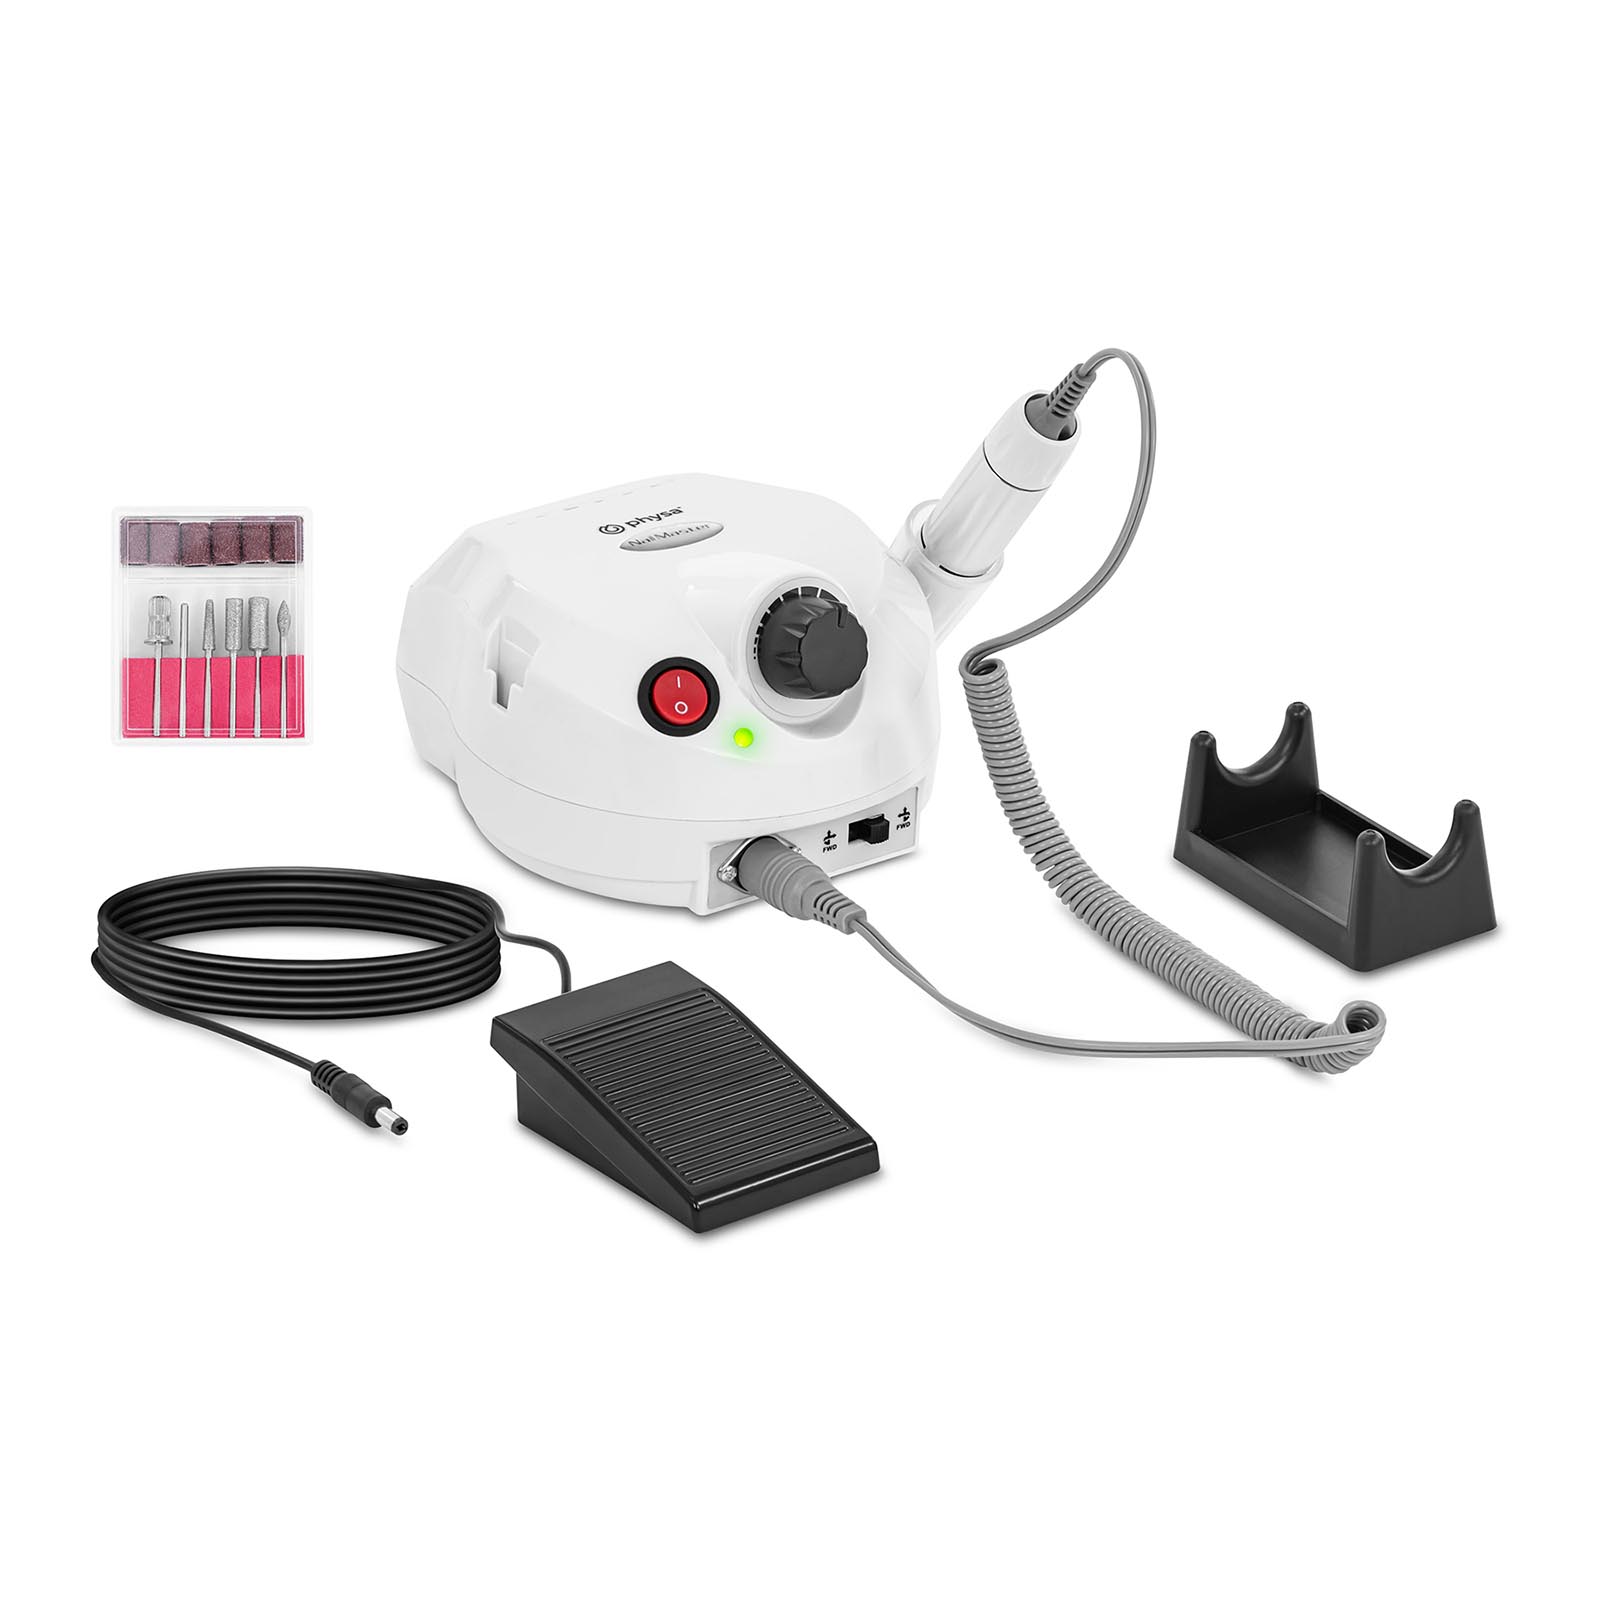 Nail cutter - 25 000 rpm - stepless - 2 directions